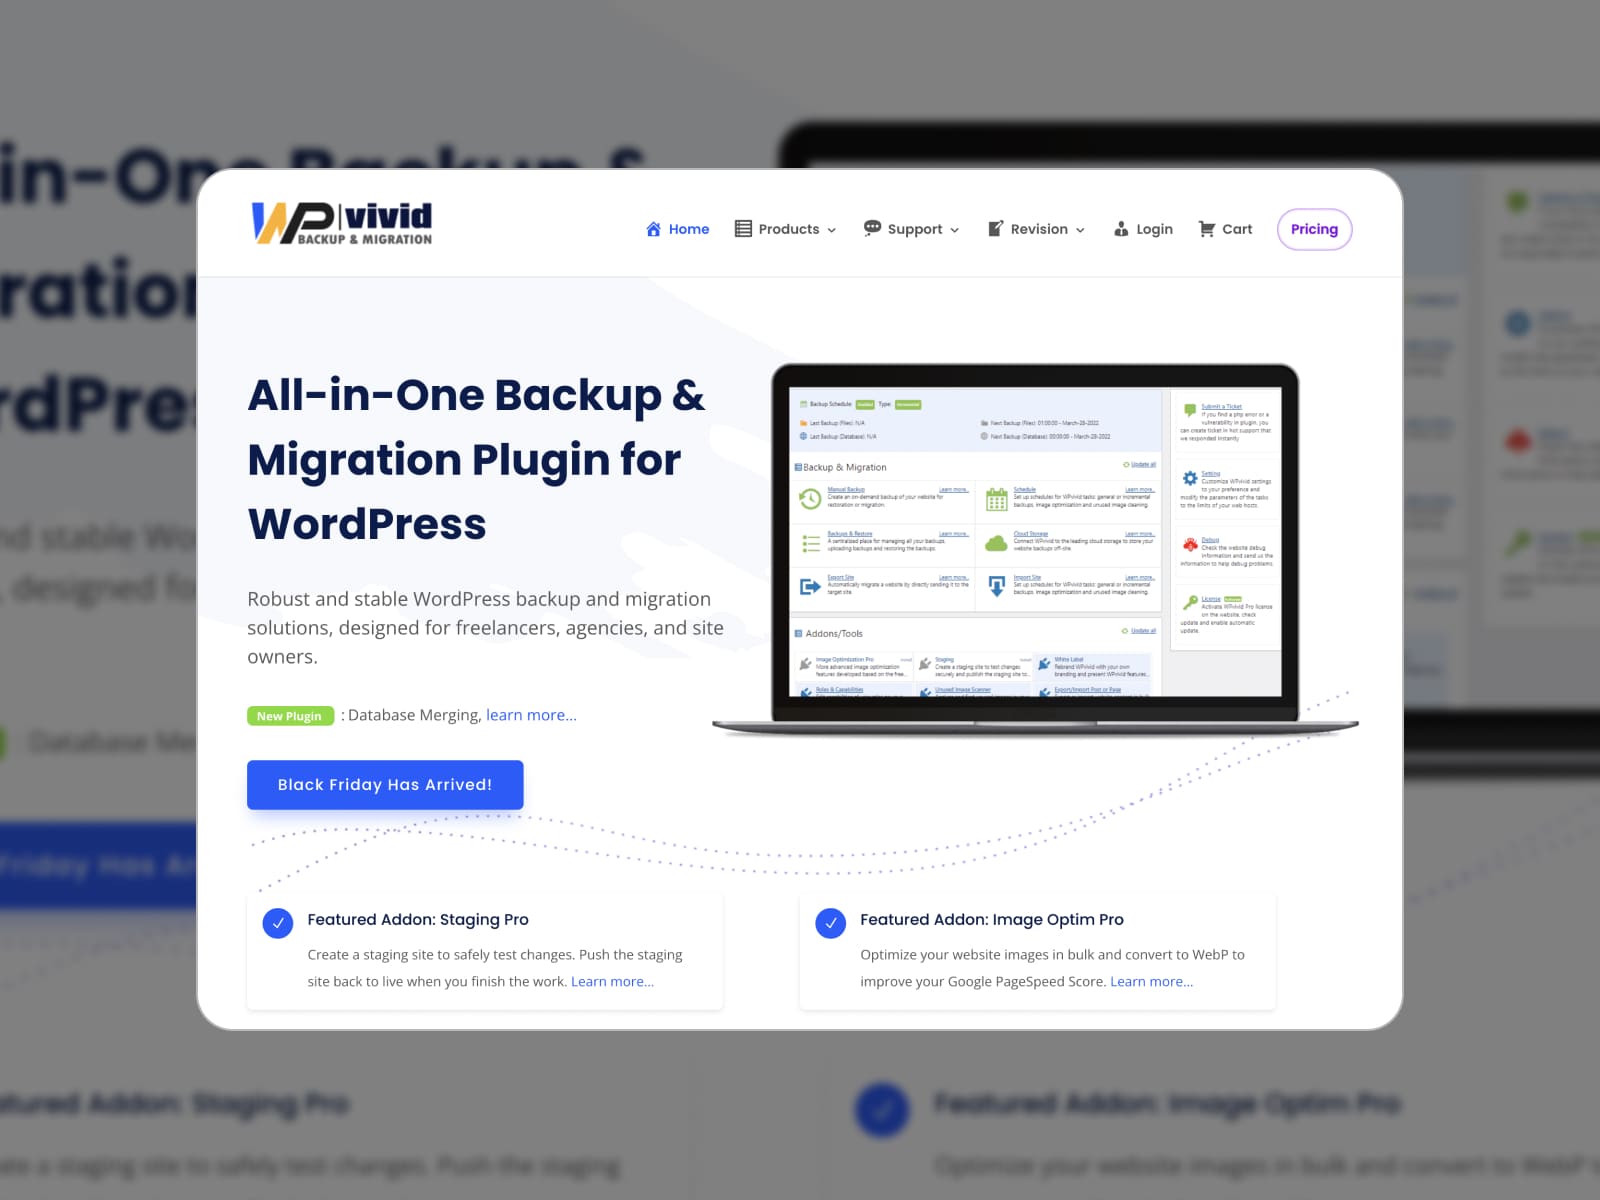 Collage of the WPvivid WordPress backup plugin homepage in white and blue colors.